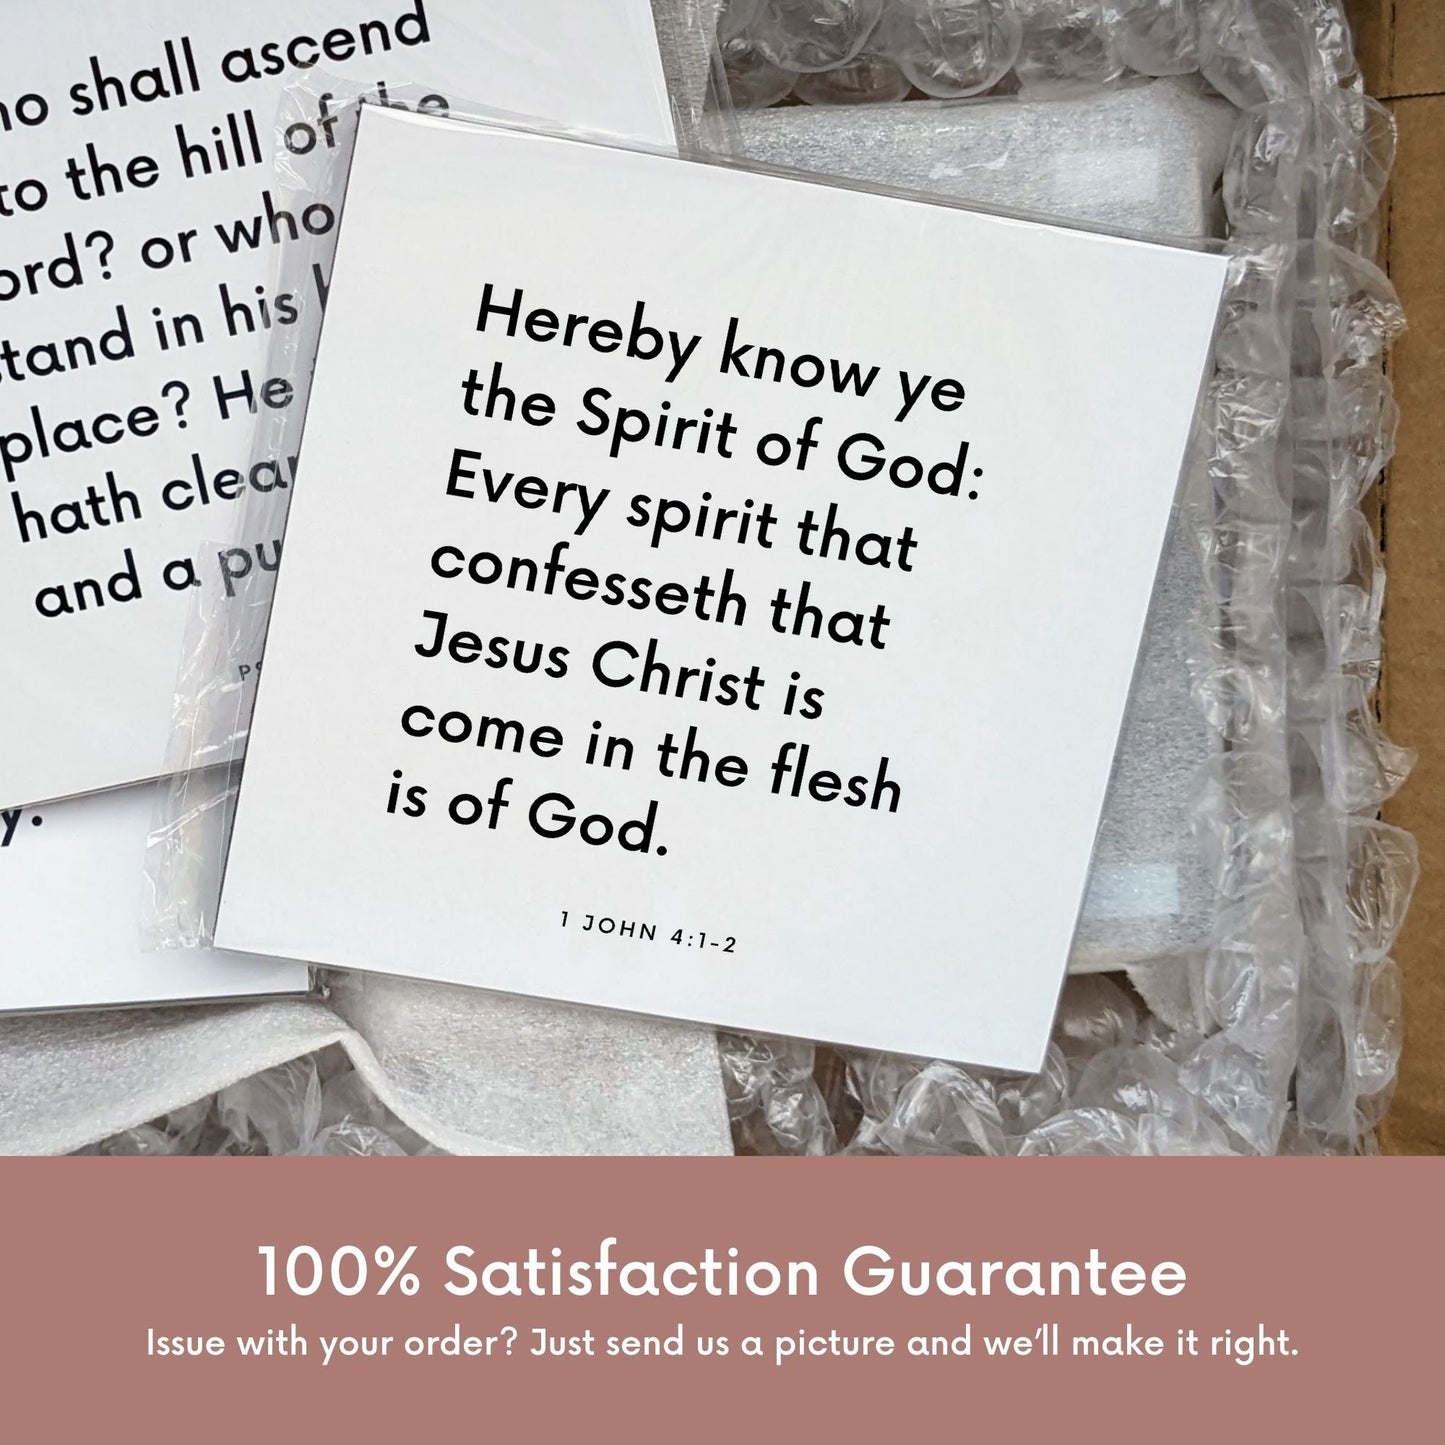 Shipping materials for scripture tile of 1 John 4:1-2 - "Every spirit that confesseth that Jesus Christ is come"